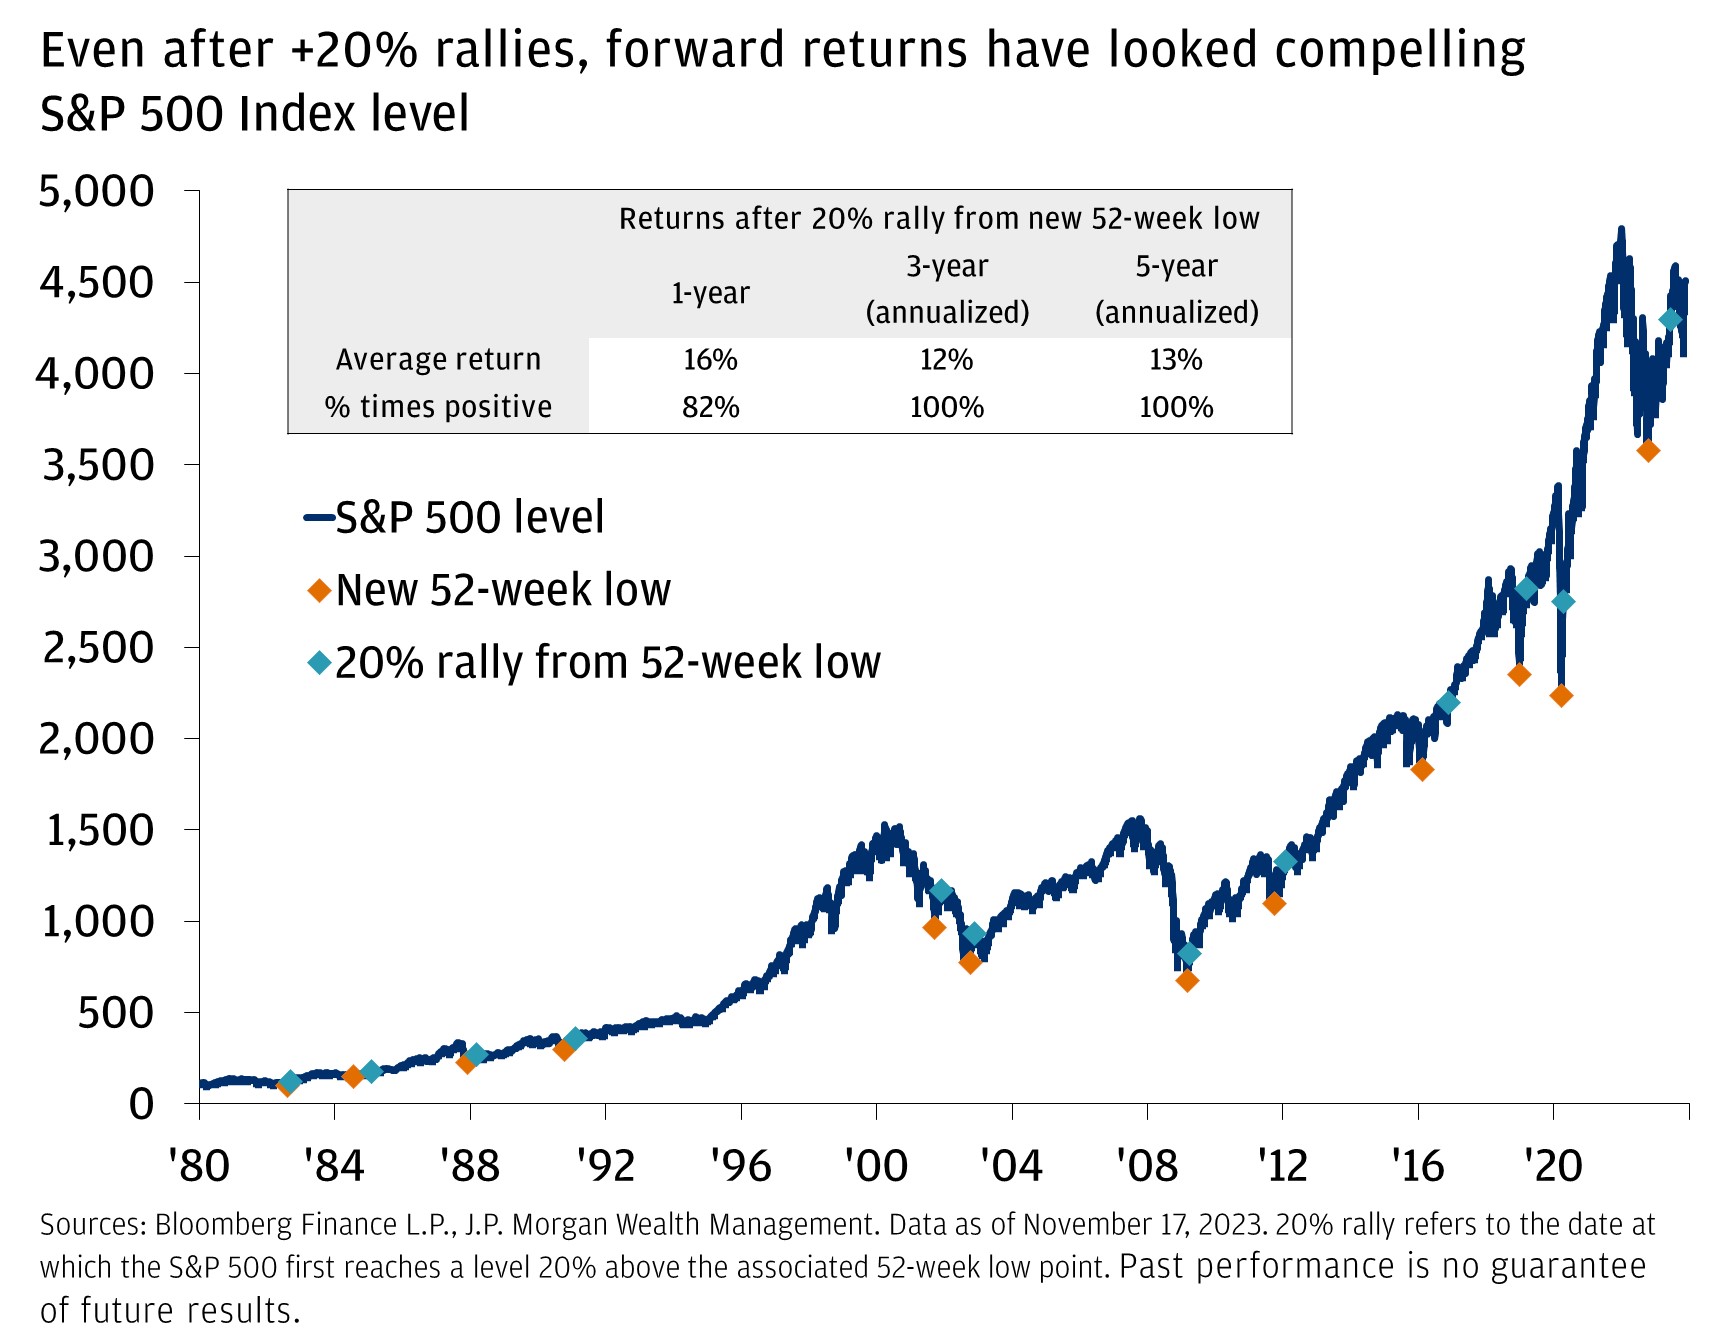 Even after +20% rallies, forward returns have looked compelling